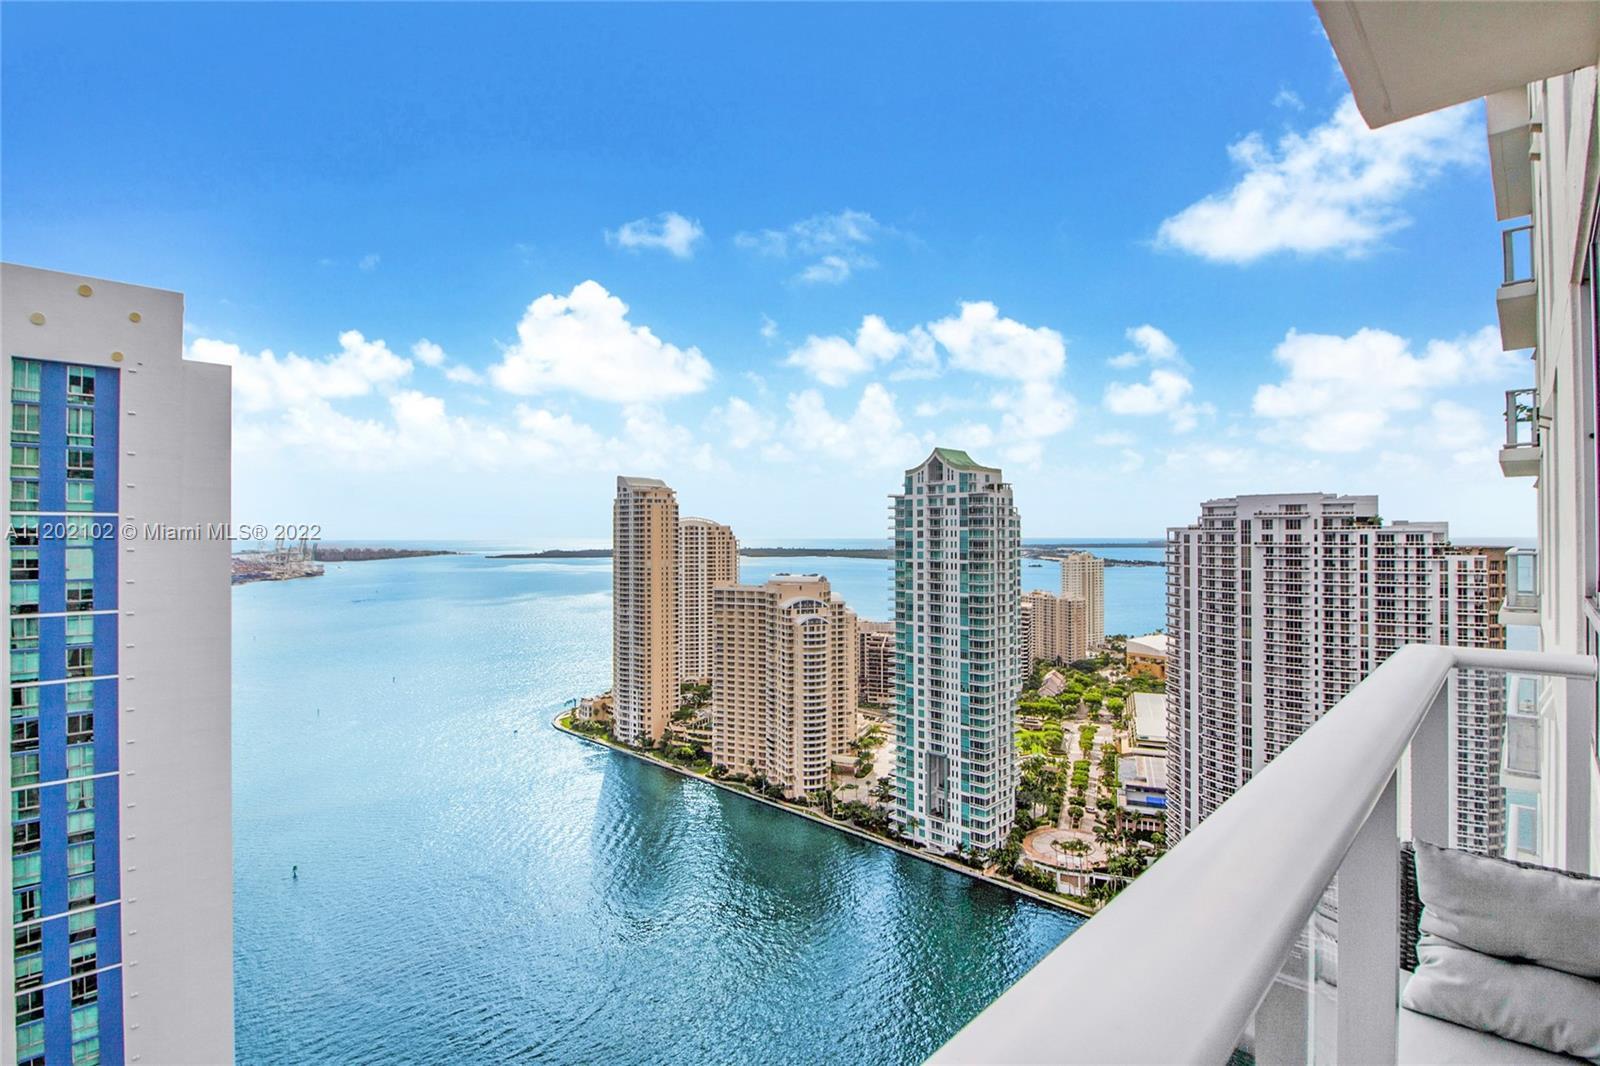 Fabulous water and city views from this spacious 2 Bedroom/2 Bath unit. Carpet flooring throughout. 